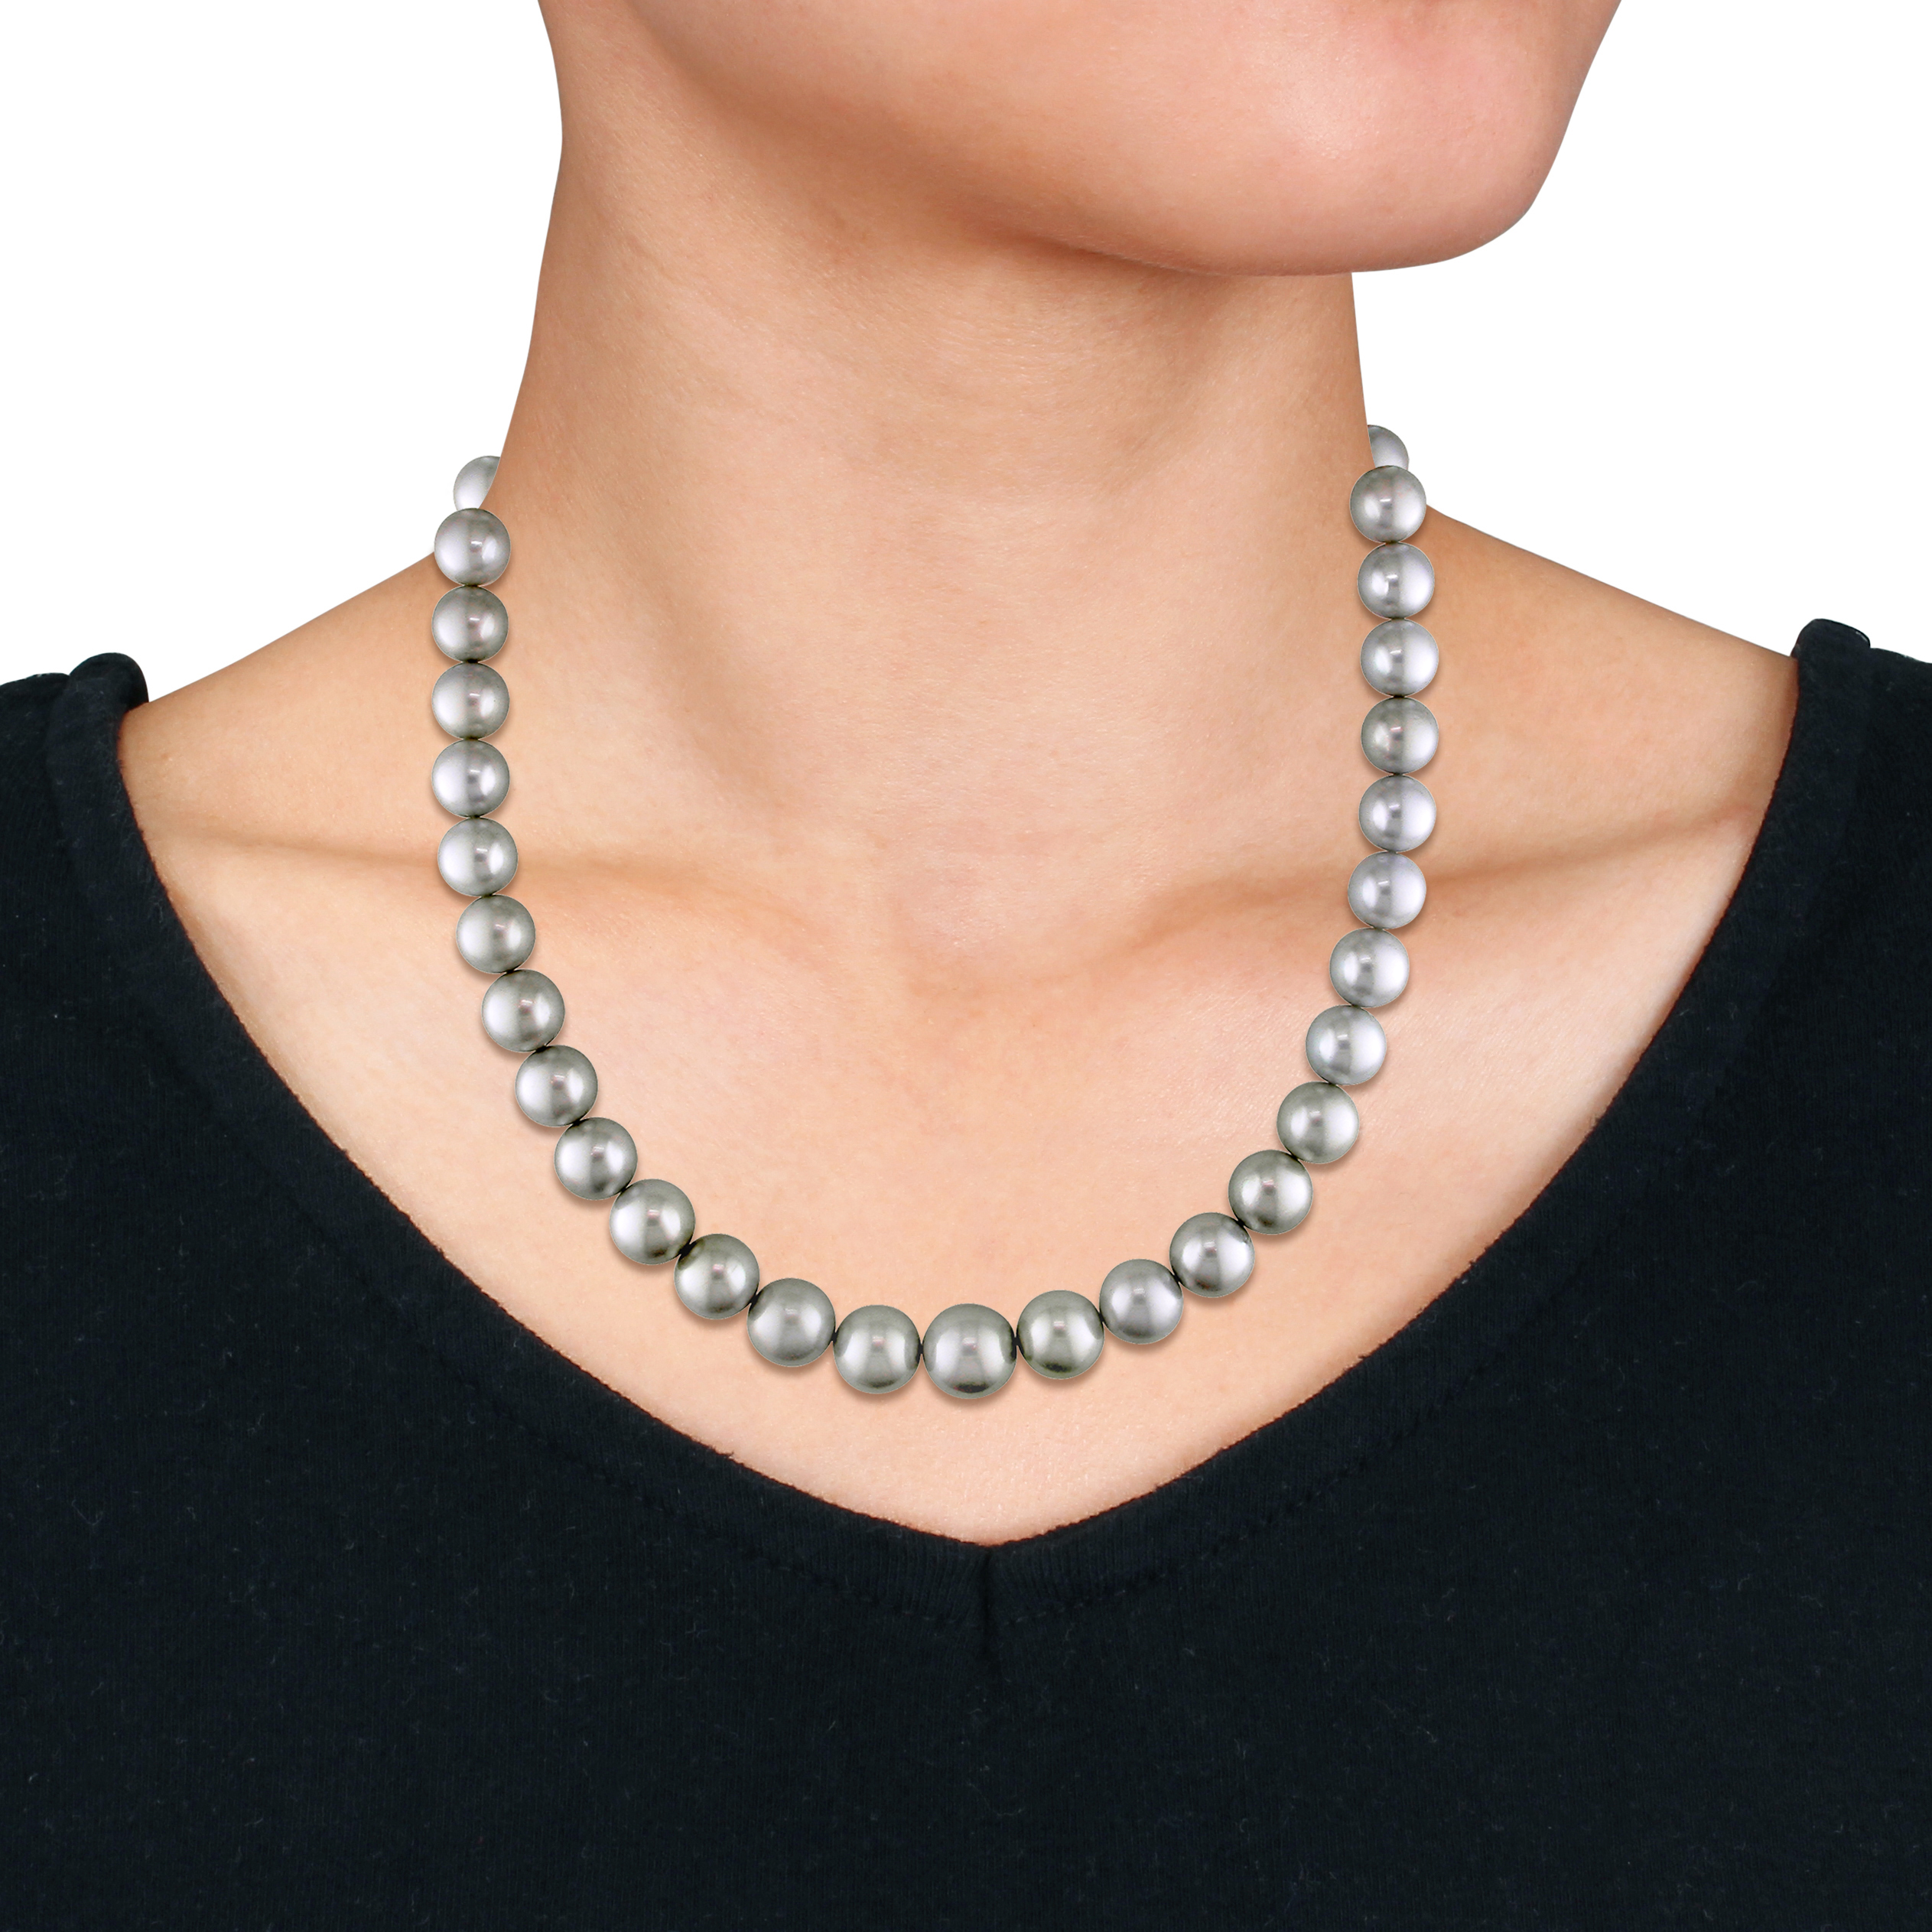 10-12 MM Cultured Tahitian Platinum Pearl Necklace with 14k White Gold Corrugated Ball Clasp - 18 in